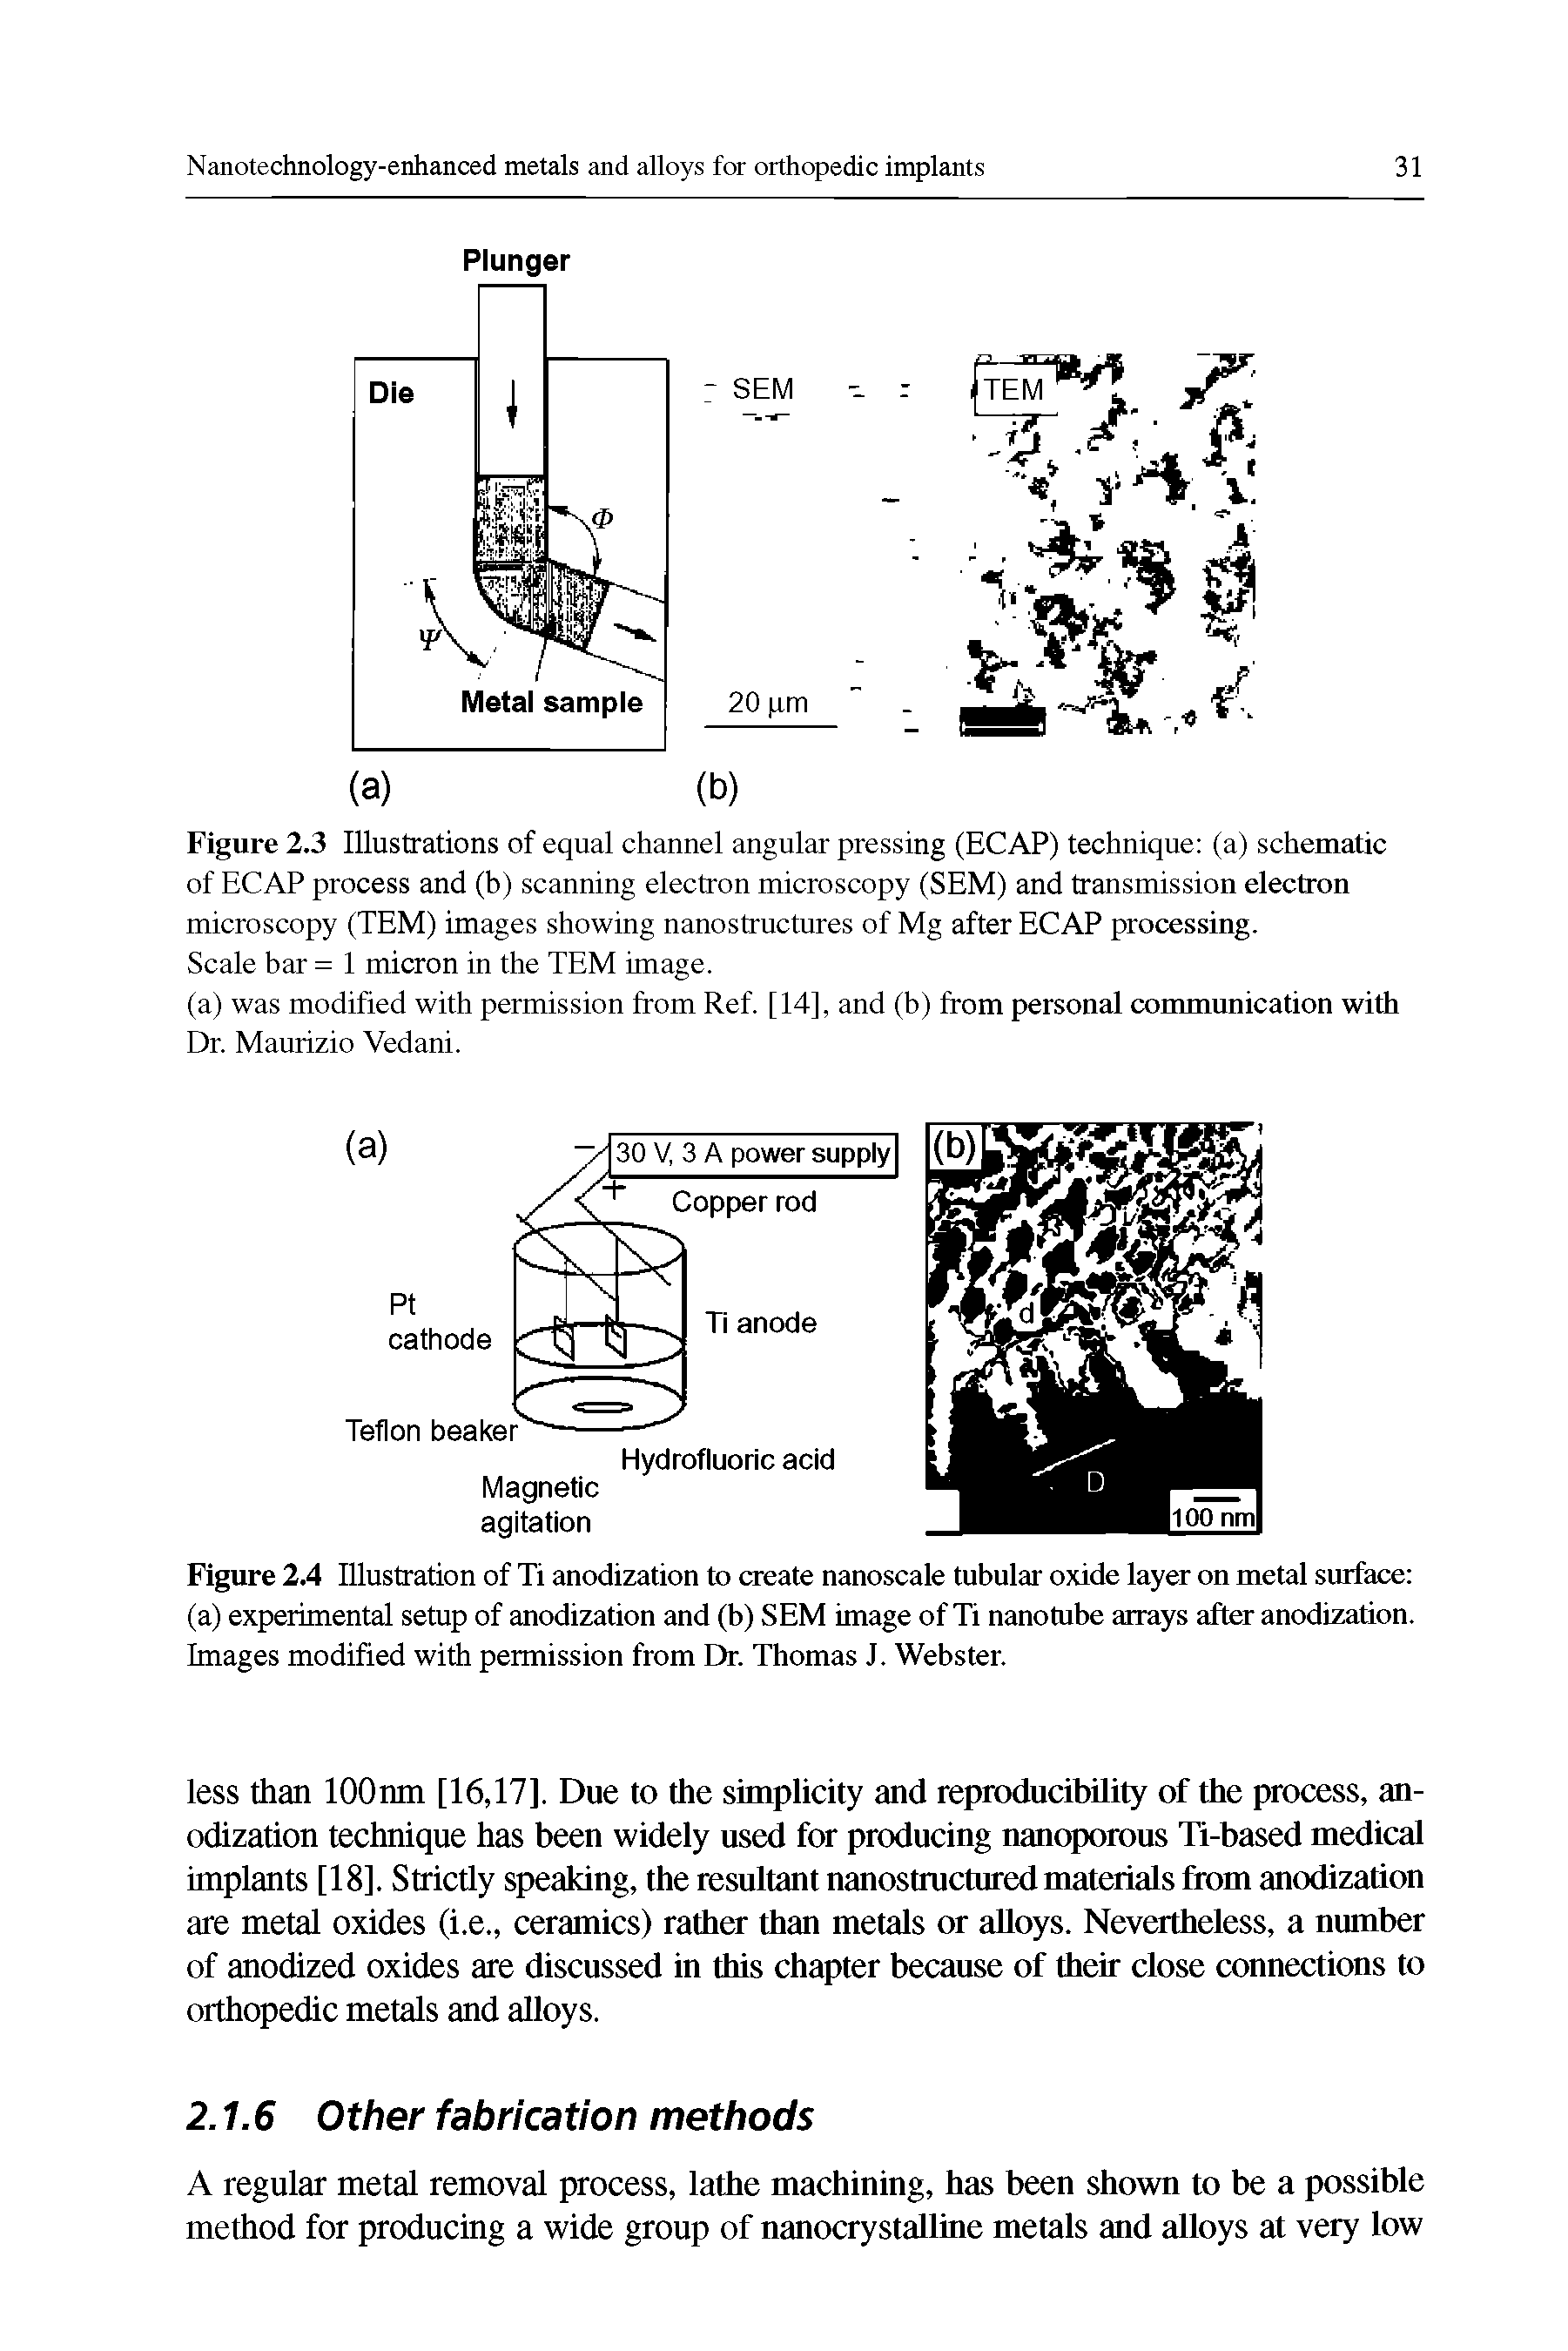 Figure 2.3 Illustrations of equal channel angular pressing (ECAP) technique (a) schematic of ECAP process and (b) scanning electron microscopy (SEM) and transmission electron microscopy (TEM) images showing nanostructures of Mg after ECAP processing.